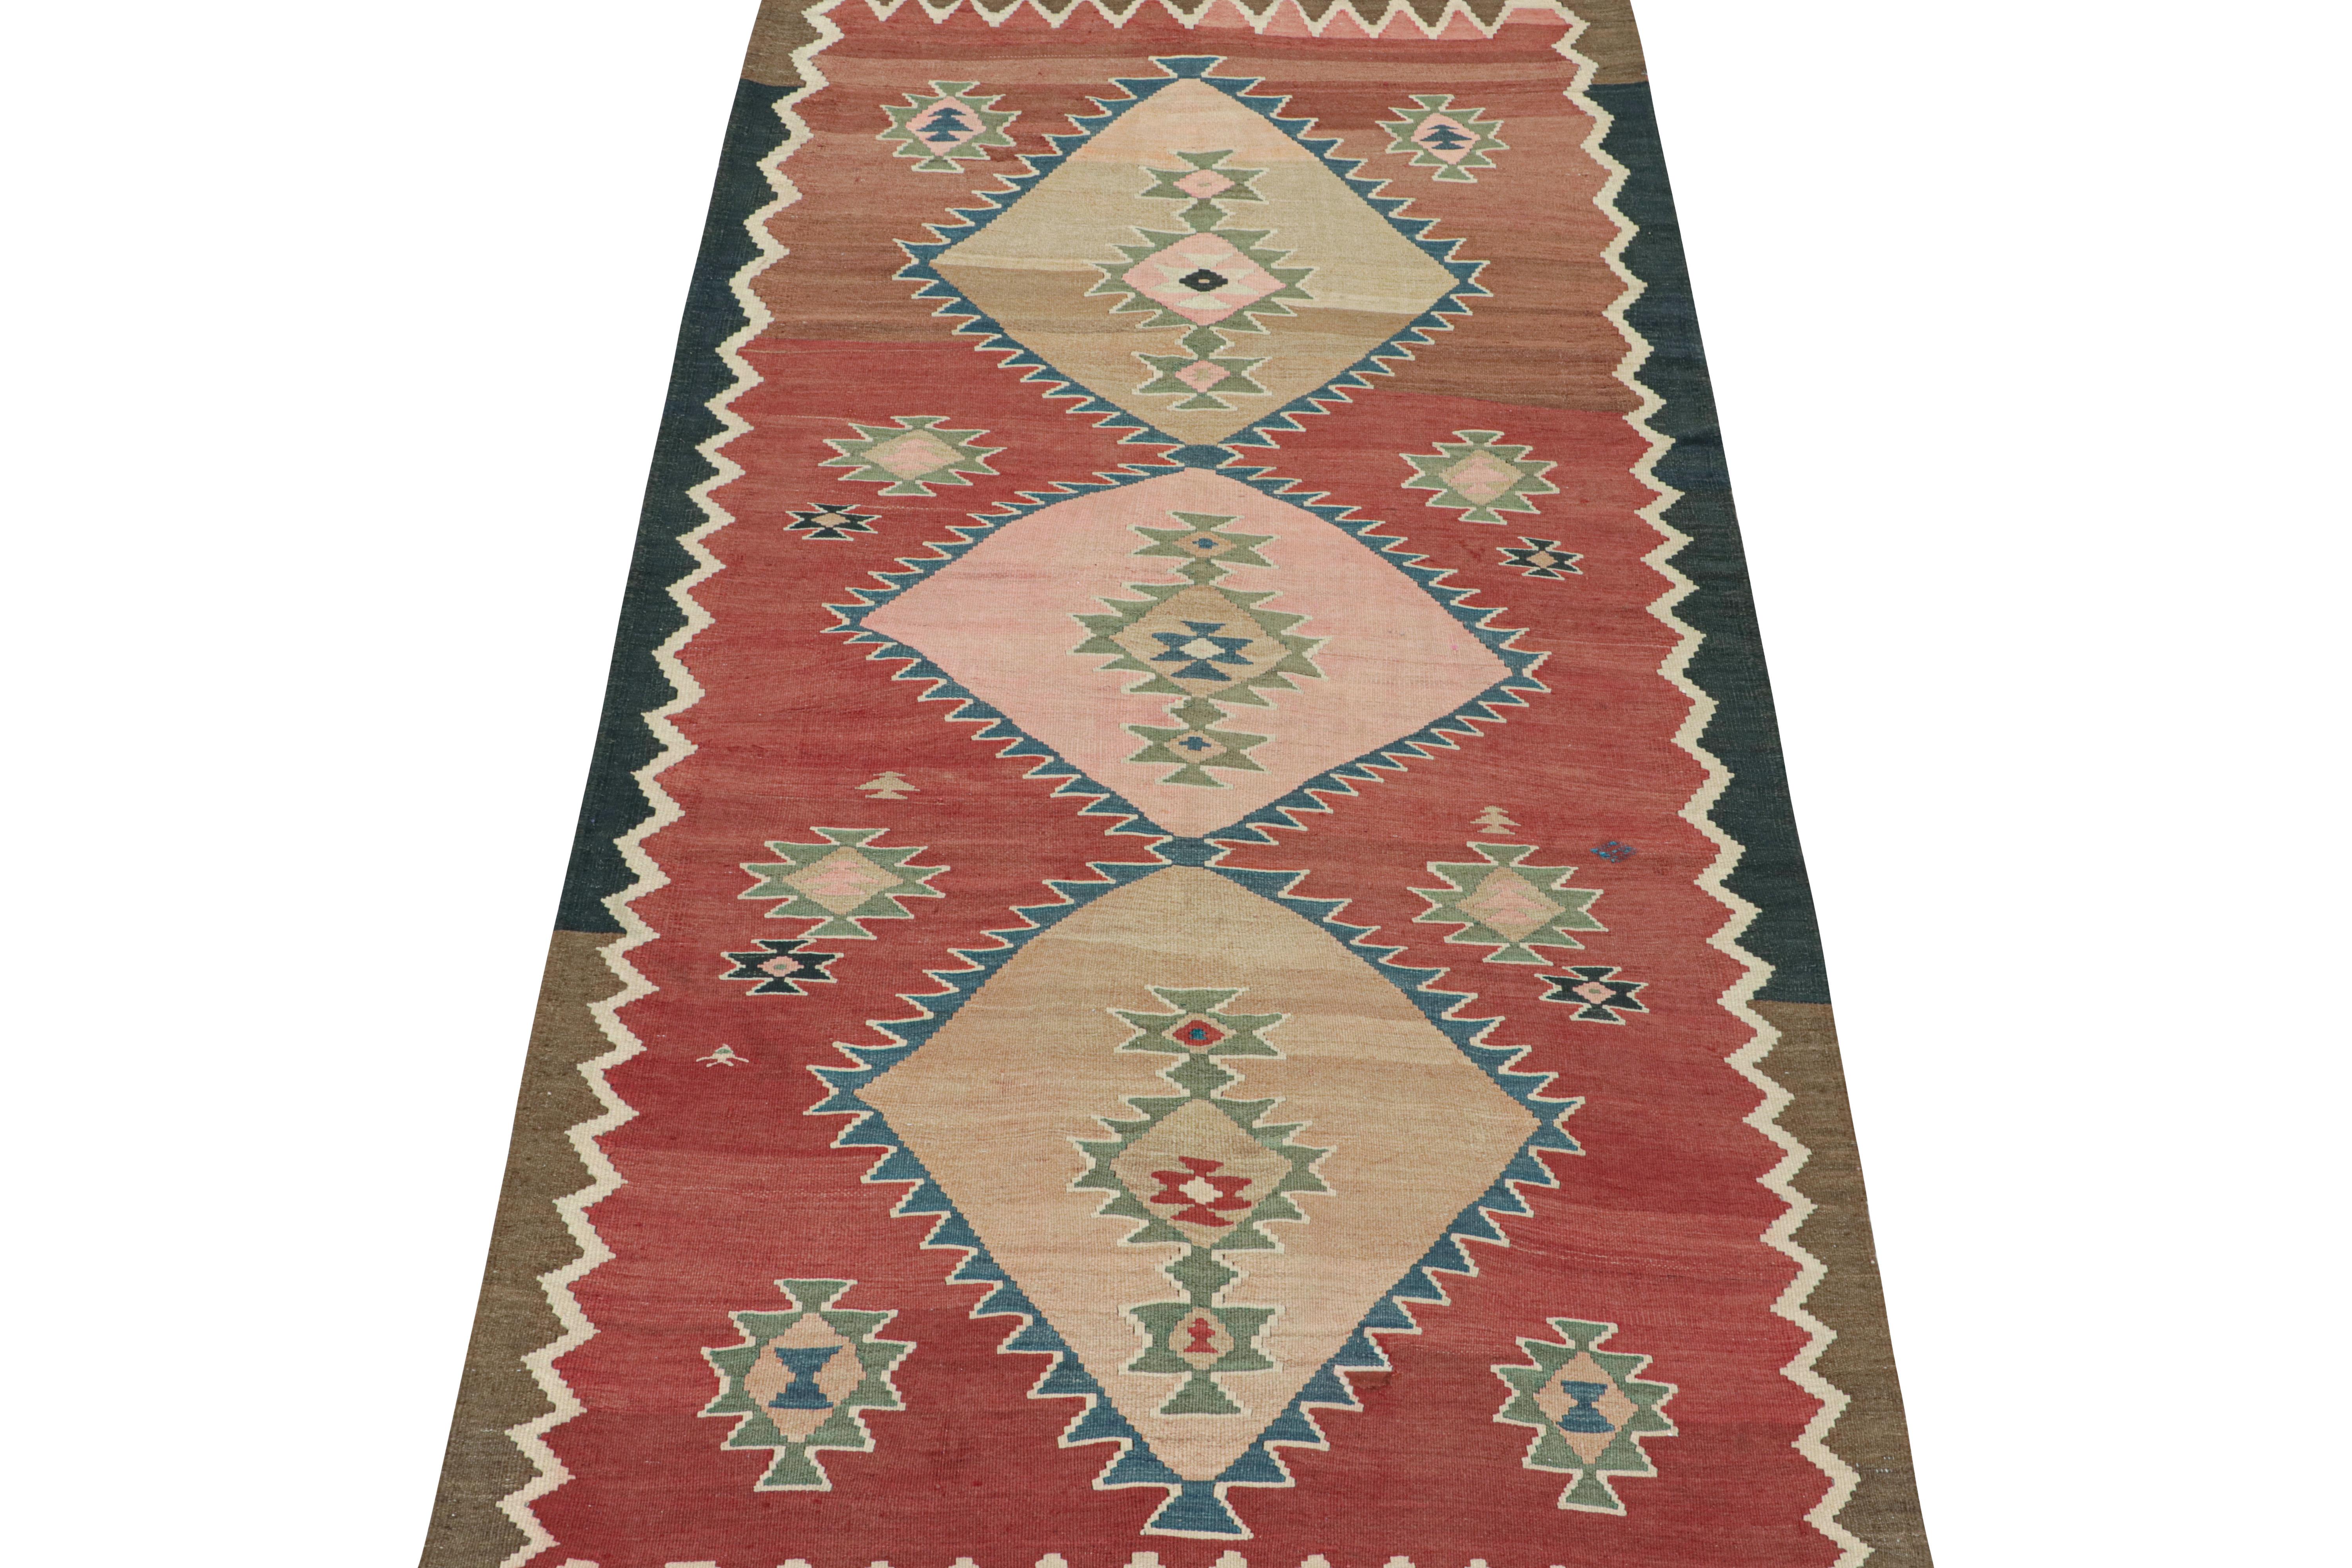 This vintage 6x11 Persian Kilim is believed to be a Bidjar tribal rug of the 1950s. Handwoven in wool.

Its design includes three large diamond-shaped medallions in beige and pink on a brick red field. Keen eyes will further admire off-white,